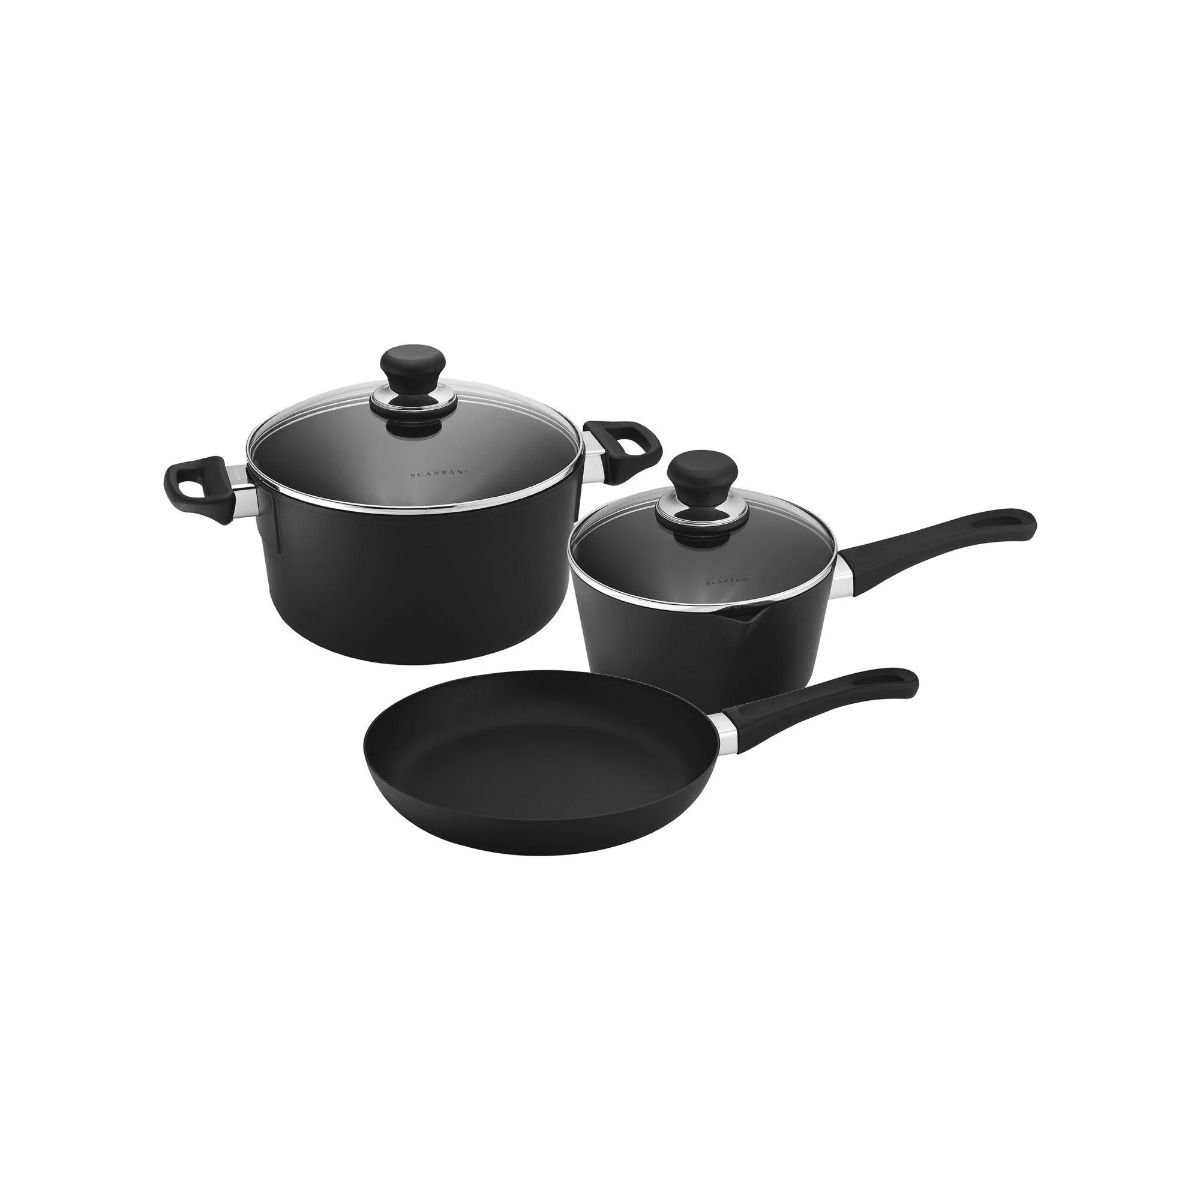 Cuisinart Chef's Classic 4-pc Mini Loaf Pan Set - Spoons N Spice